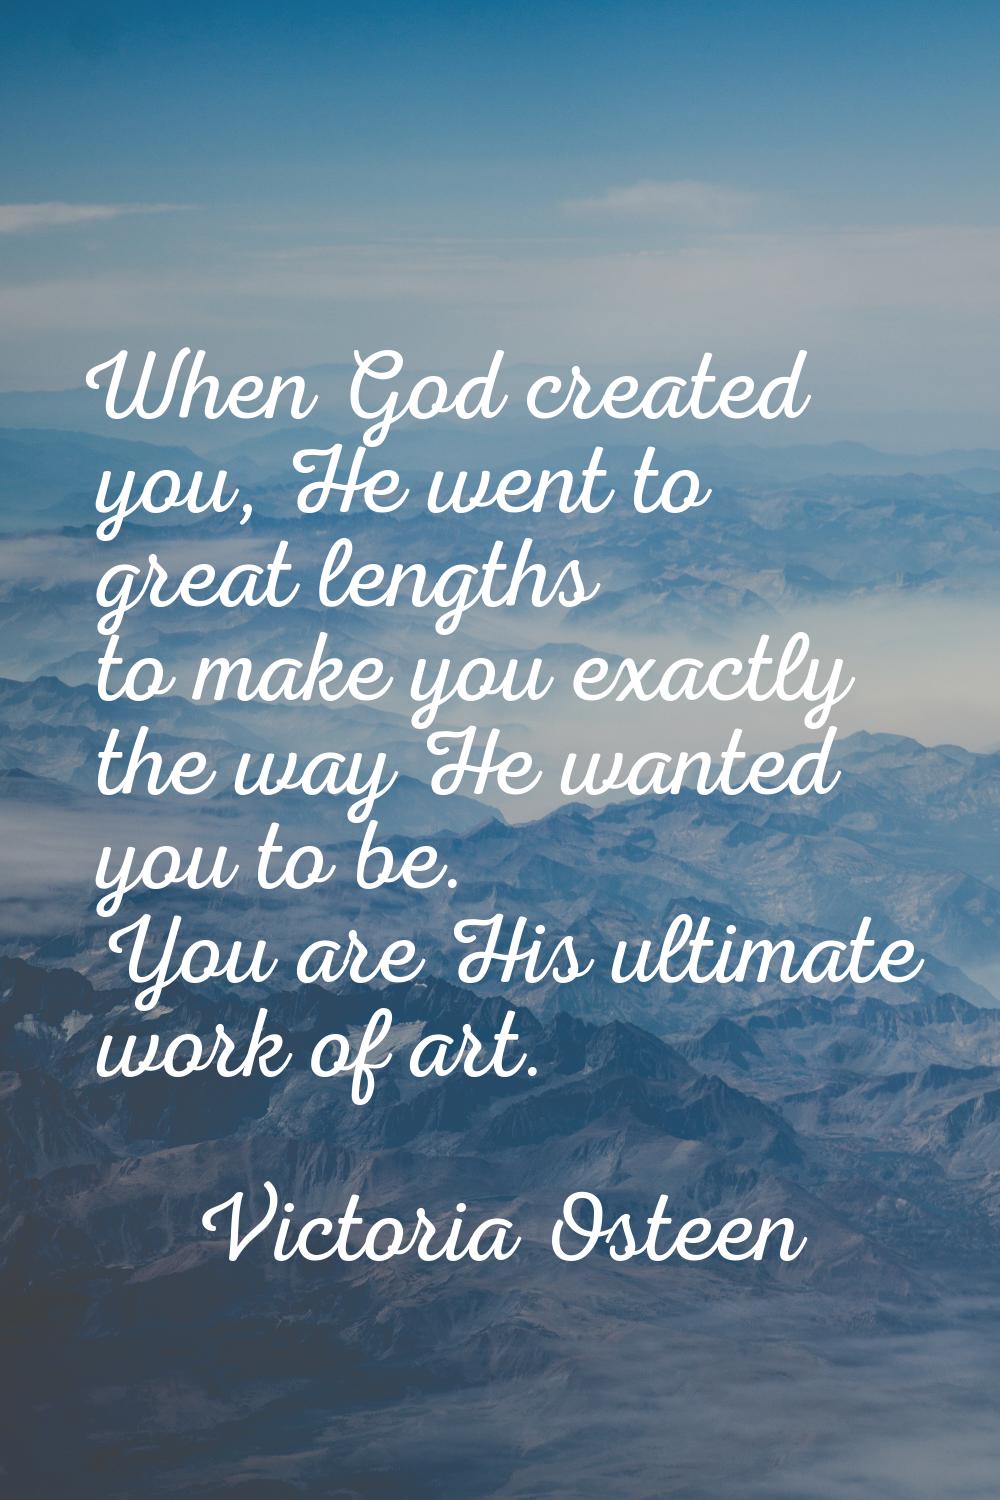 When God created you, He went to great lengths to make you exactly the way He wanted you to be. You